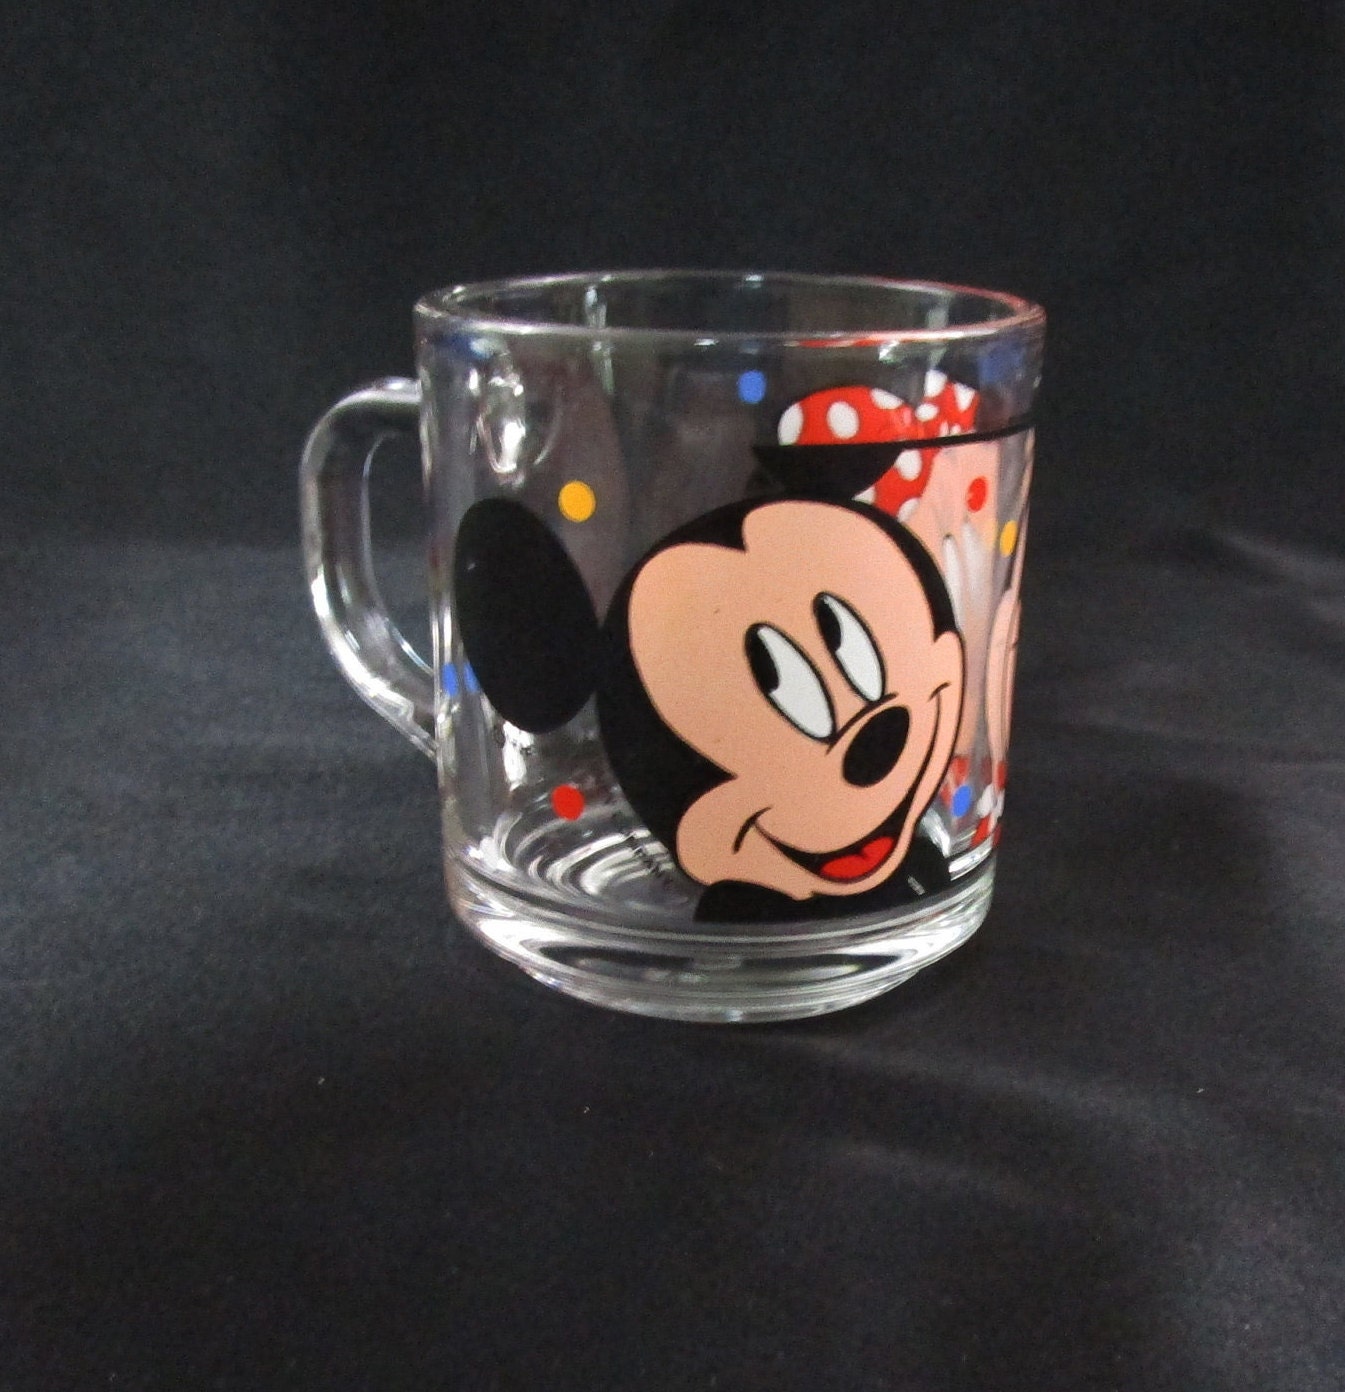 Vintage Anchor Hocking Disney's Mickey Mouse Club 1955 Clear Glass